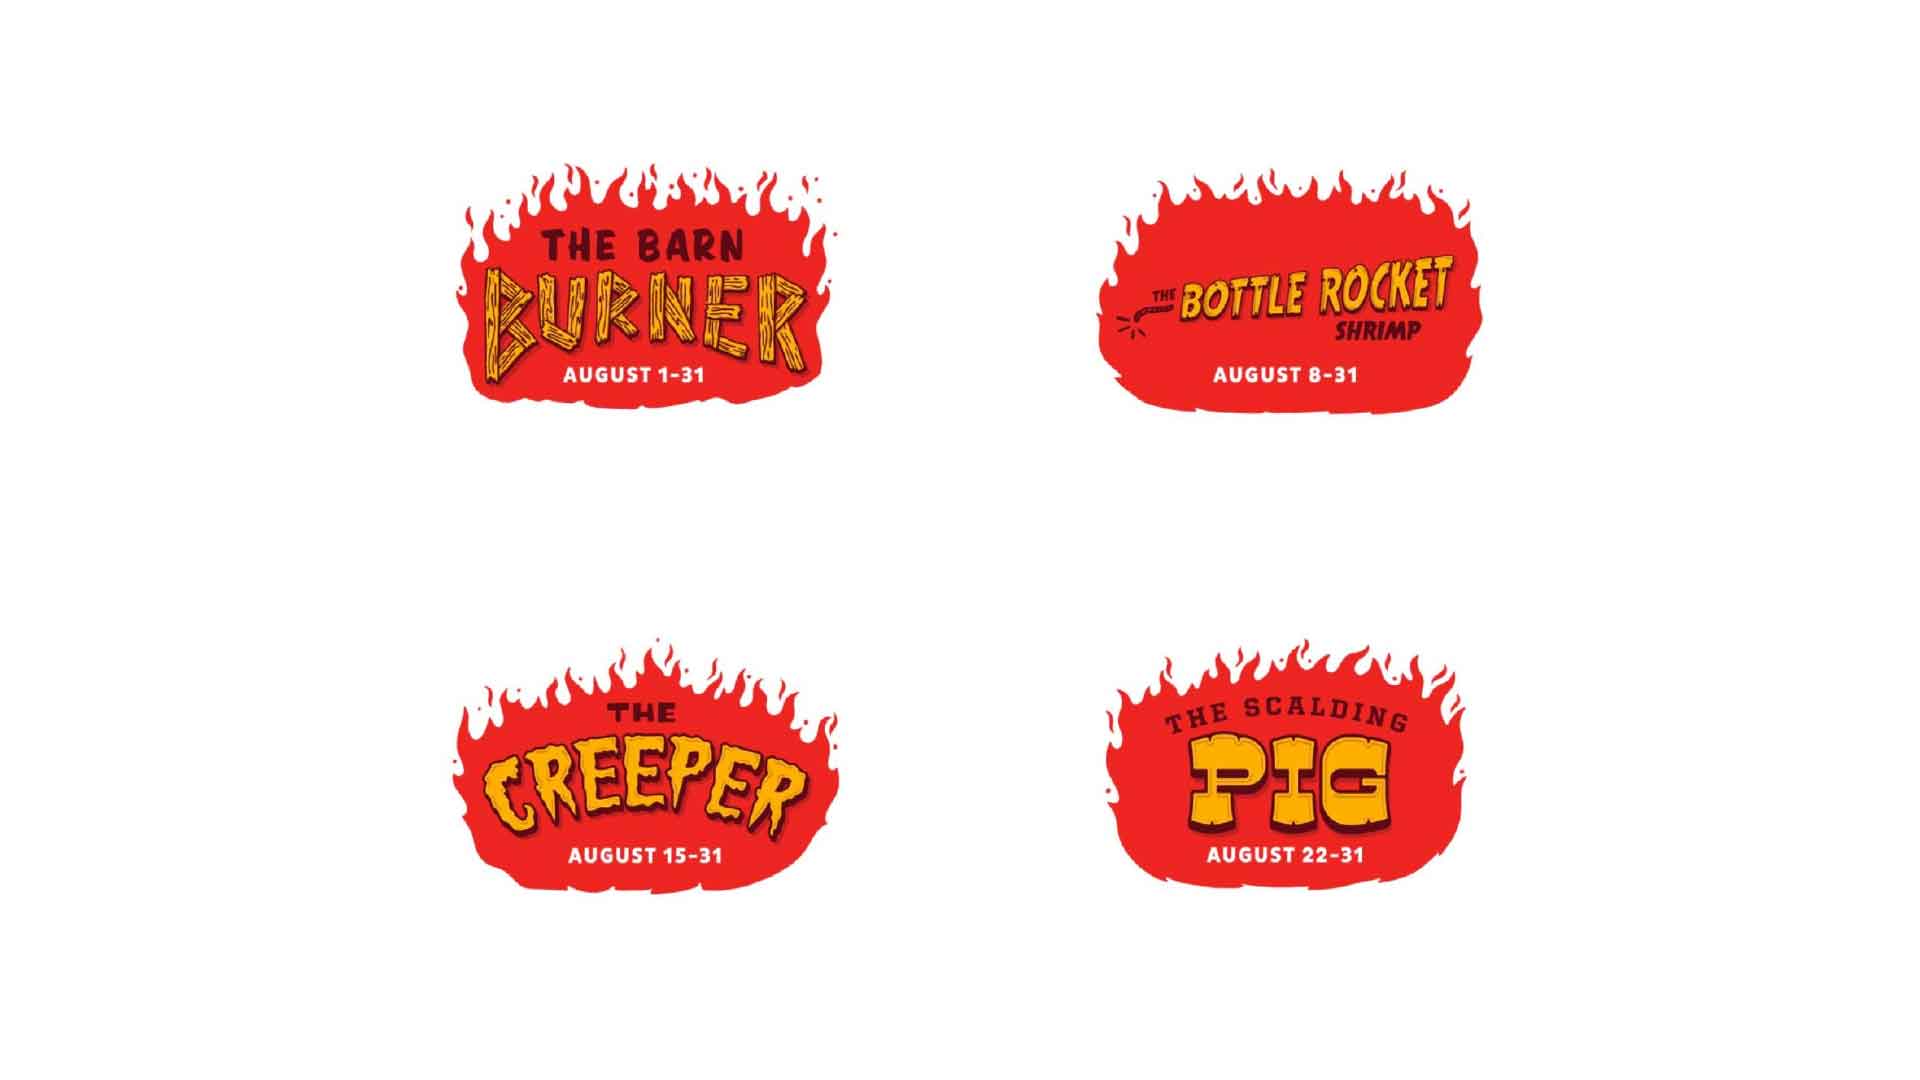 Logo designs for Torchy's Tacos' four super hot tacos from its Some Like It Hot campaign: the Barn Burner, the Bottle Rocket Shrimp, the Creeper, and the Scalding Pig